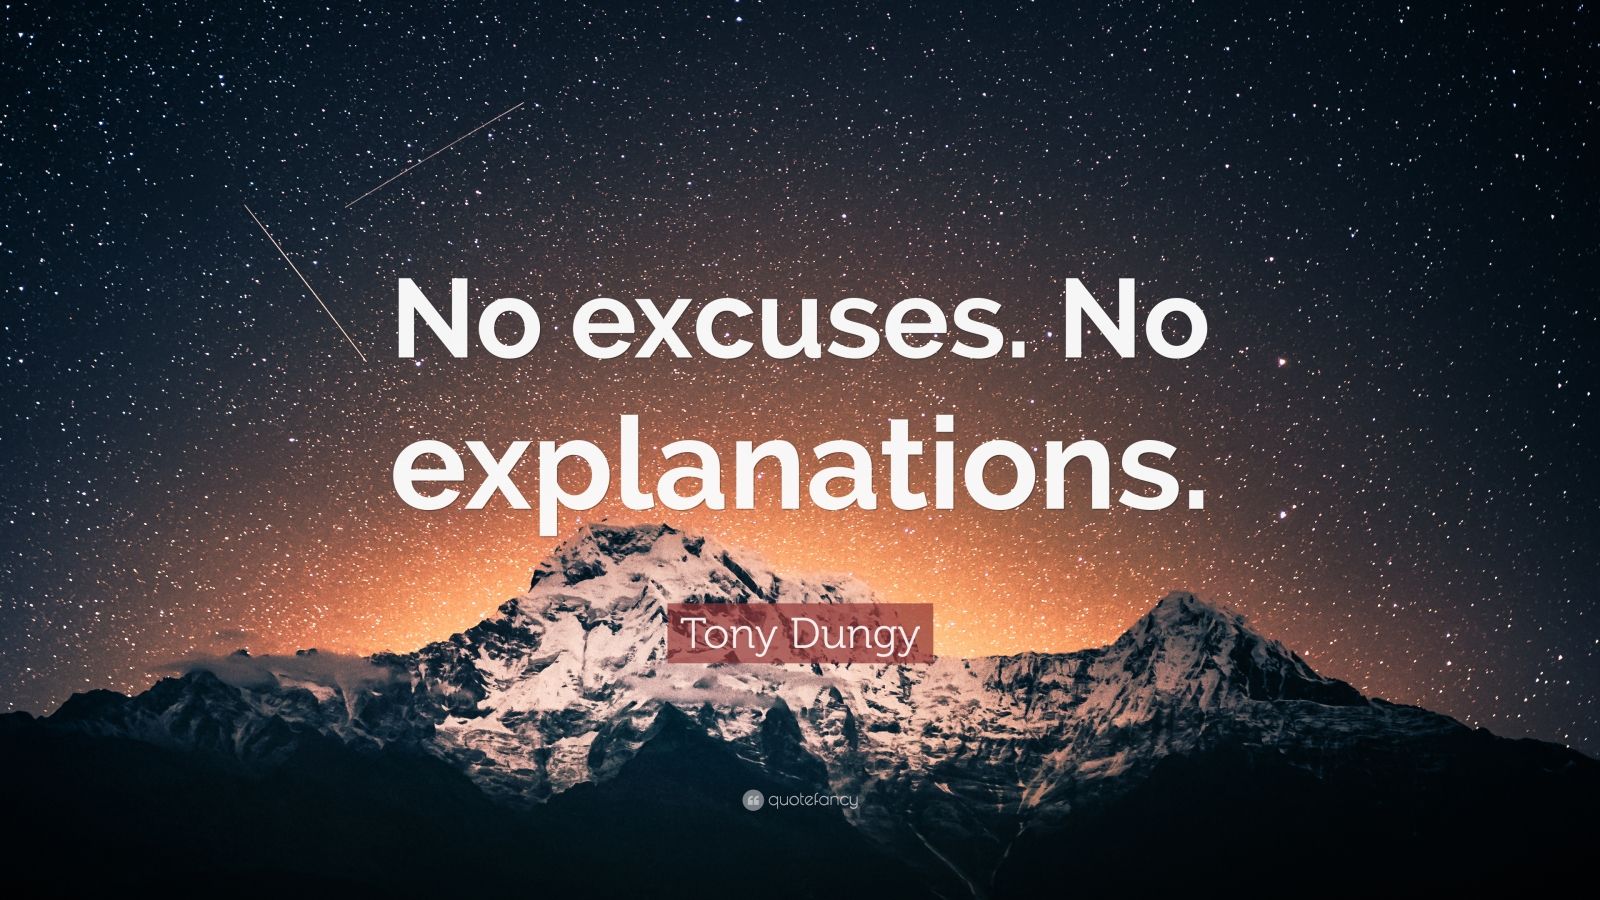 Tony Dungy Quote: “No Excuses. No Explanations.” (7 Wallpapers